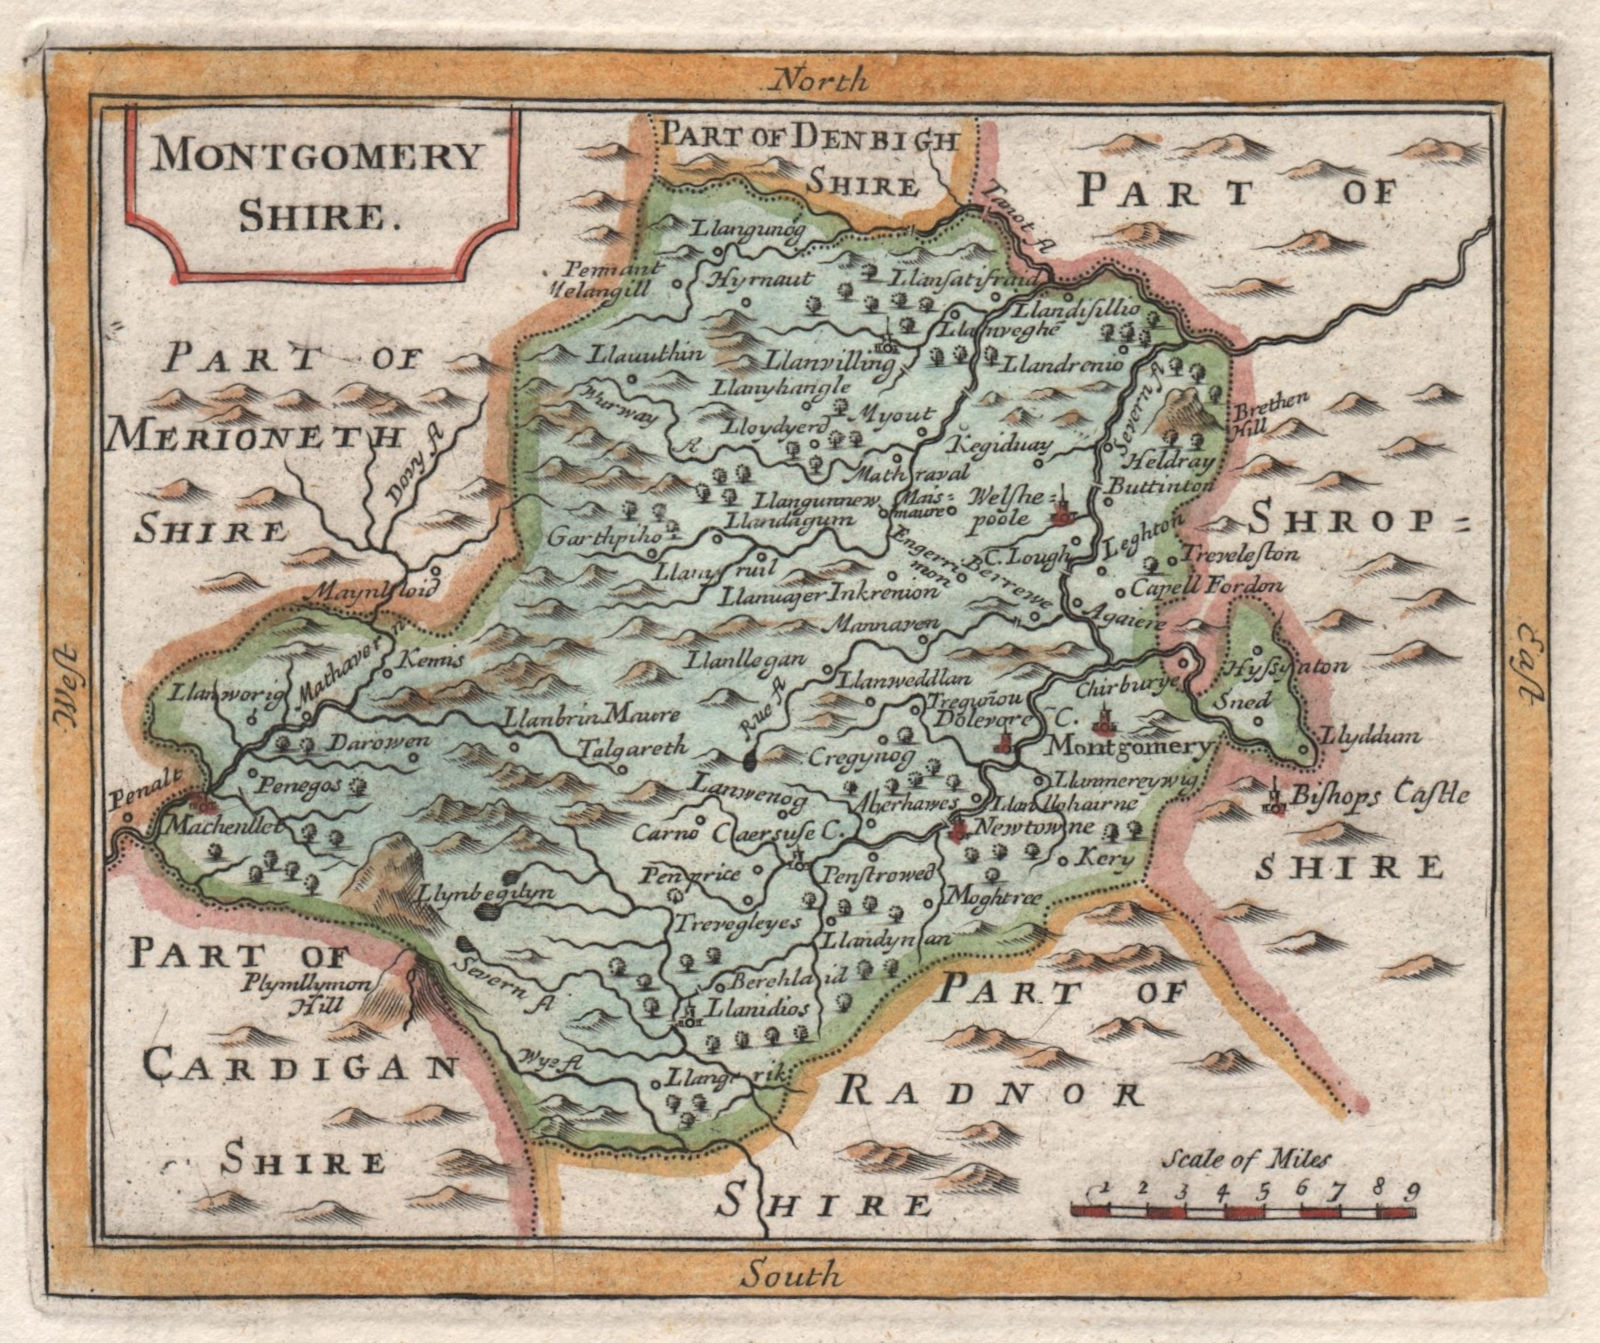 Antique county map of Montgomeryshire by Francis Grose / John Seller 1783